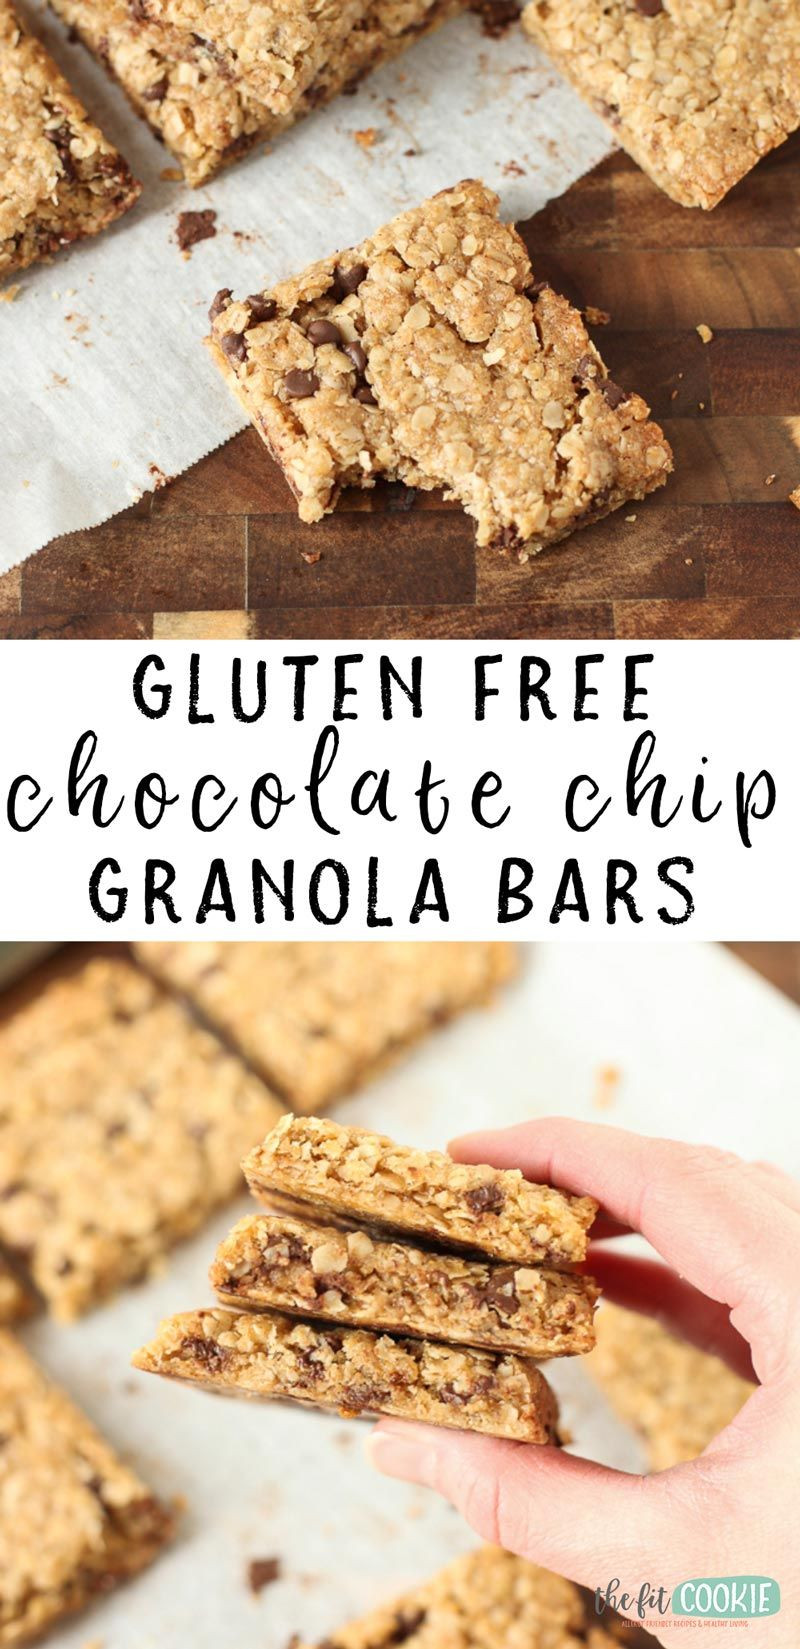 Gluten Free Dairy Free Desserts Store Bought
 Craving granola bars that are simple chewy and better